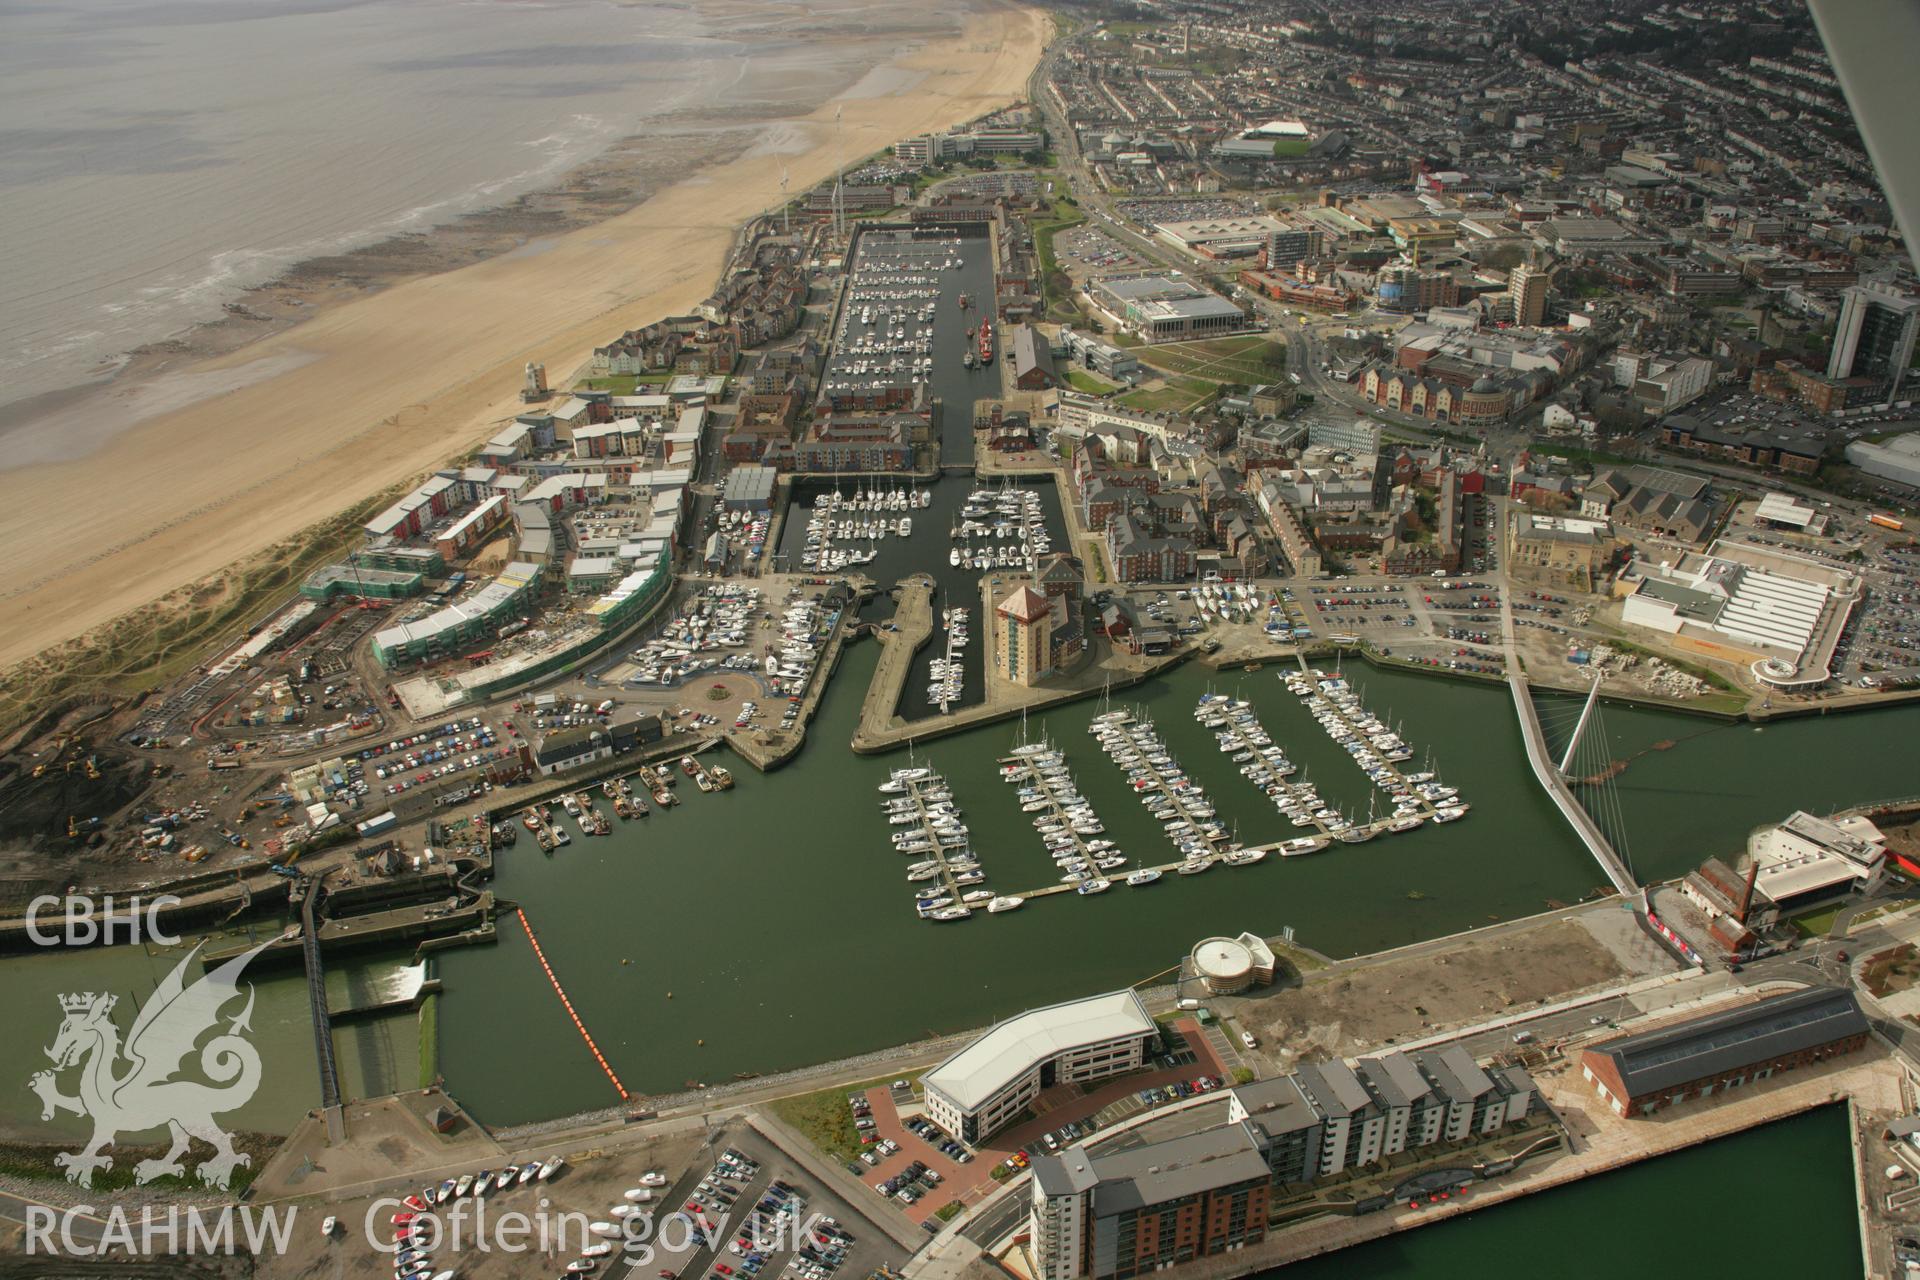 RCAHMW colour oblique aerial photograph of Swansea showing the city and docks. Taken on 16 March 2007 by Toby Driver